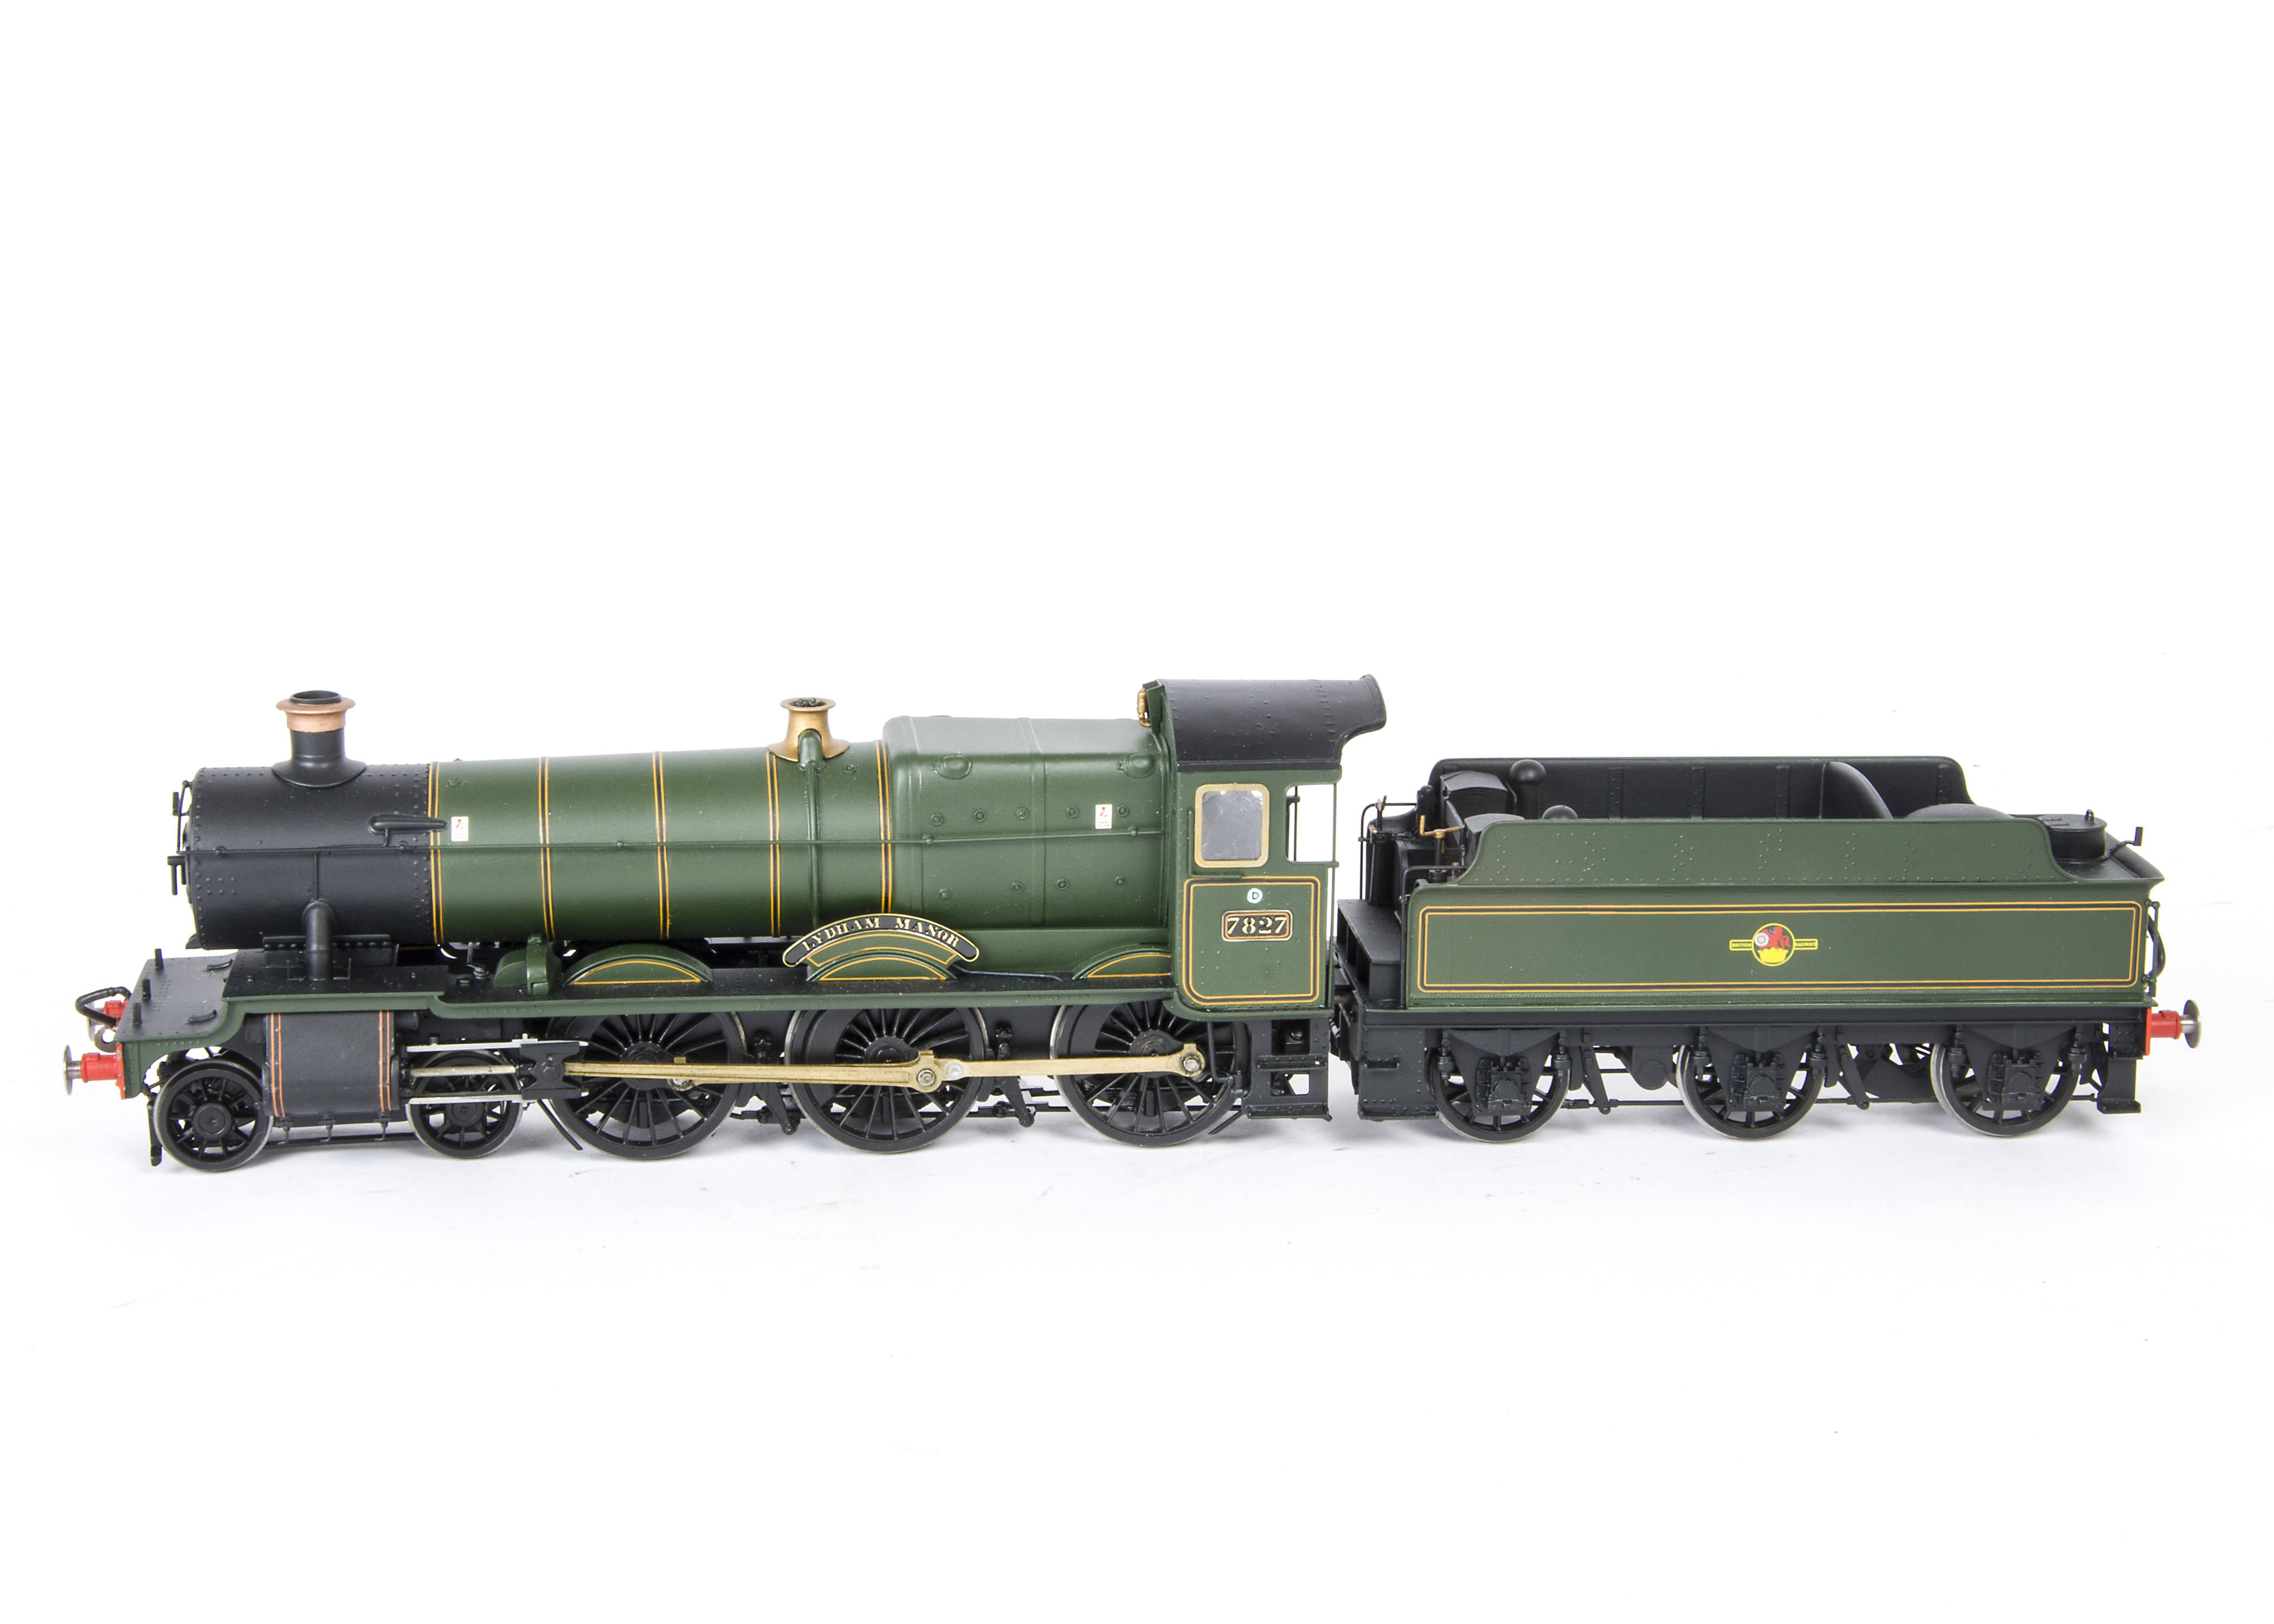 A Finescale O Gauge GWR 'Manor' Class Locomotive and Tender by Hebridean Finescale, beautifully made